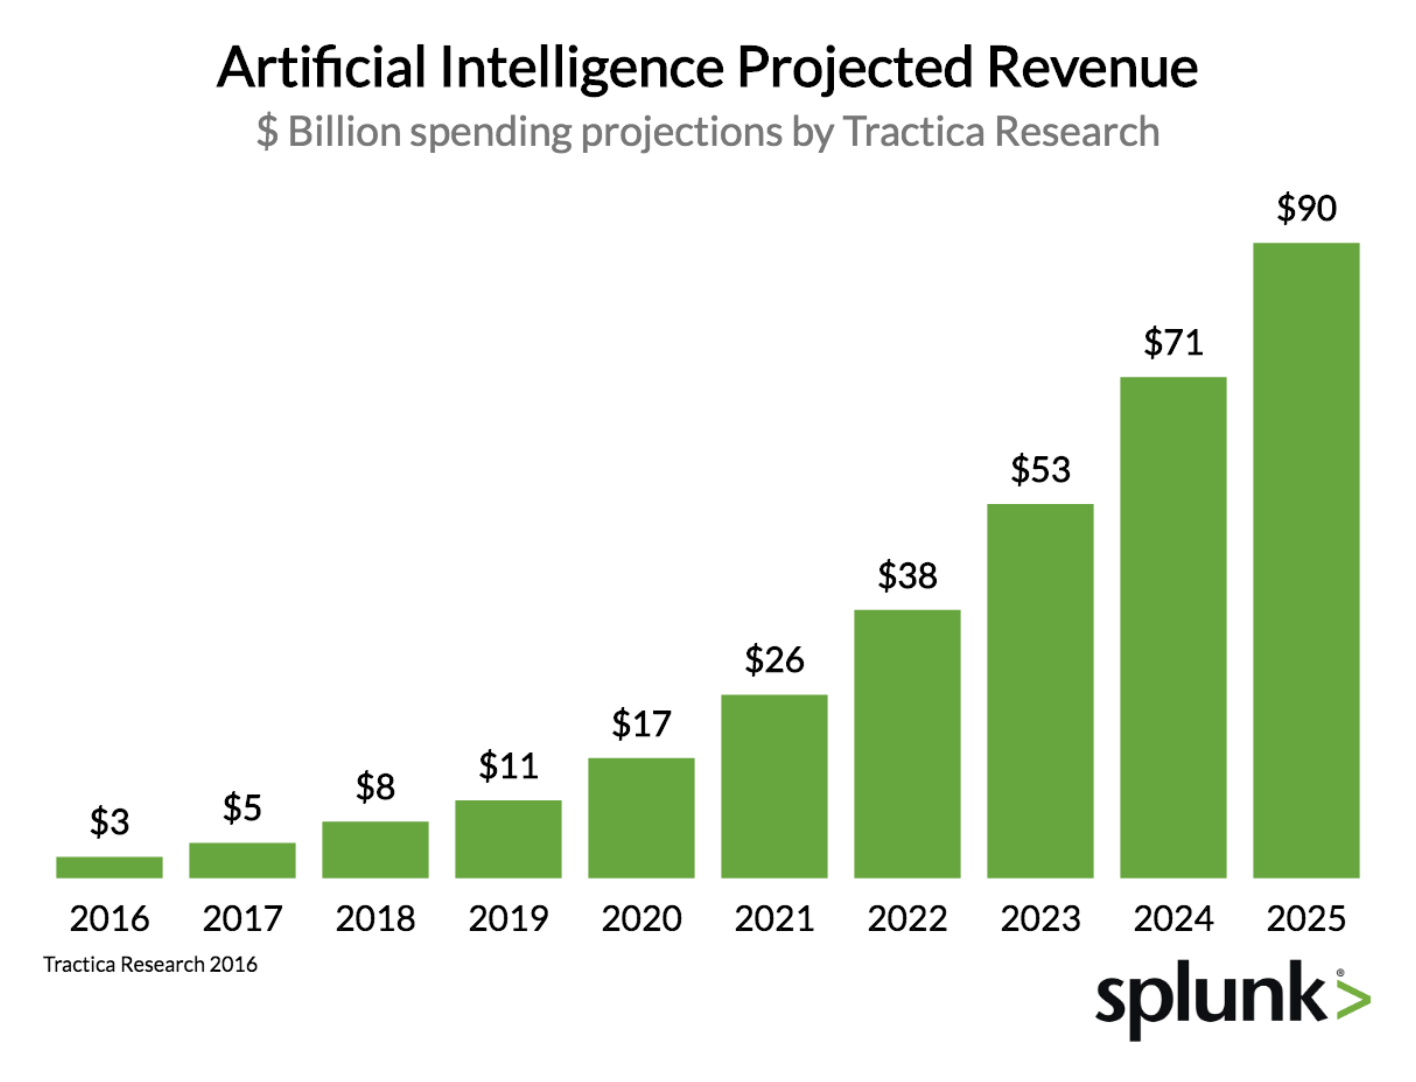 AI projected revenue growth from 2016 to 2025